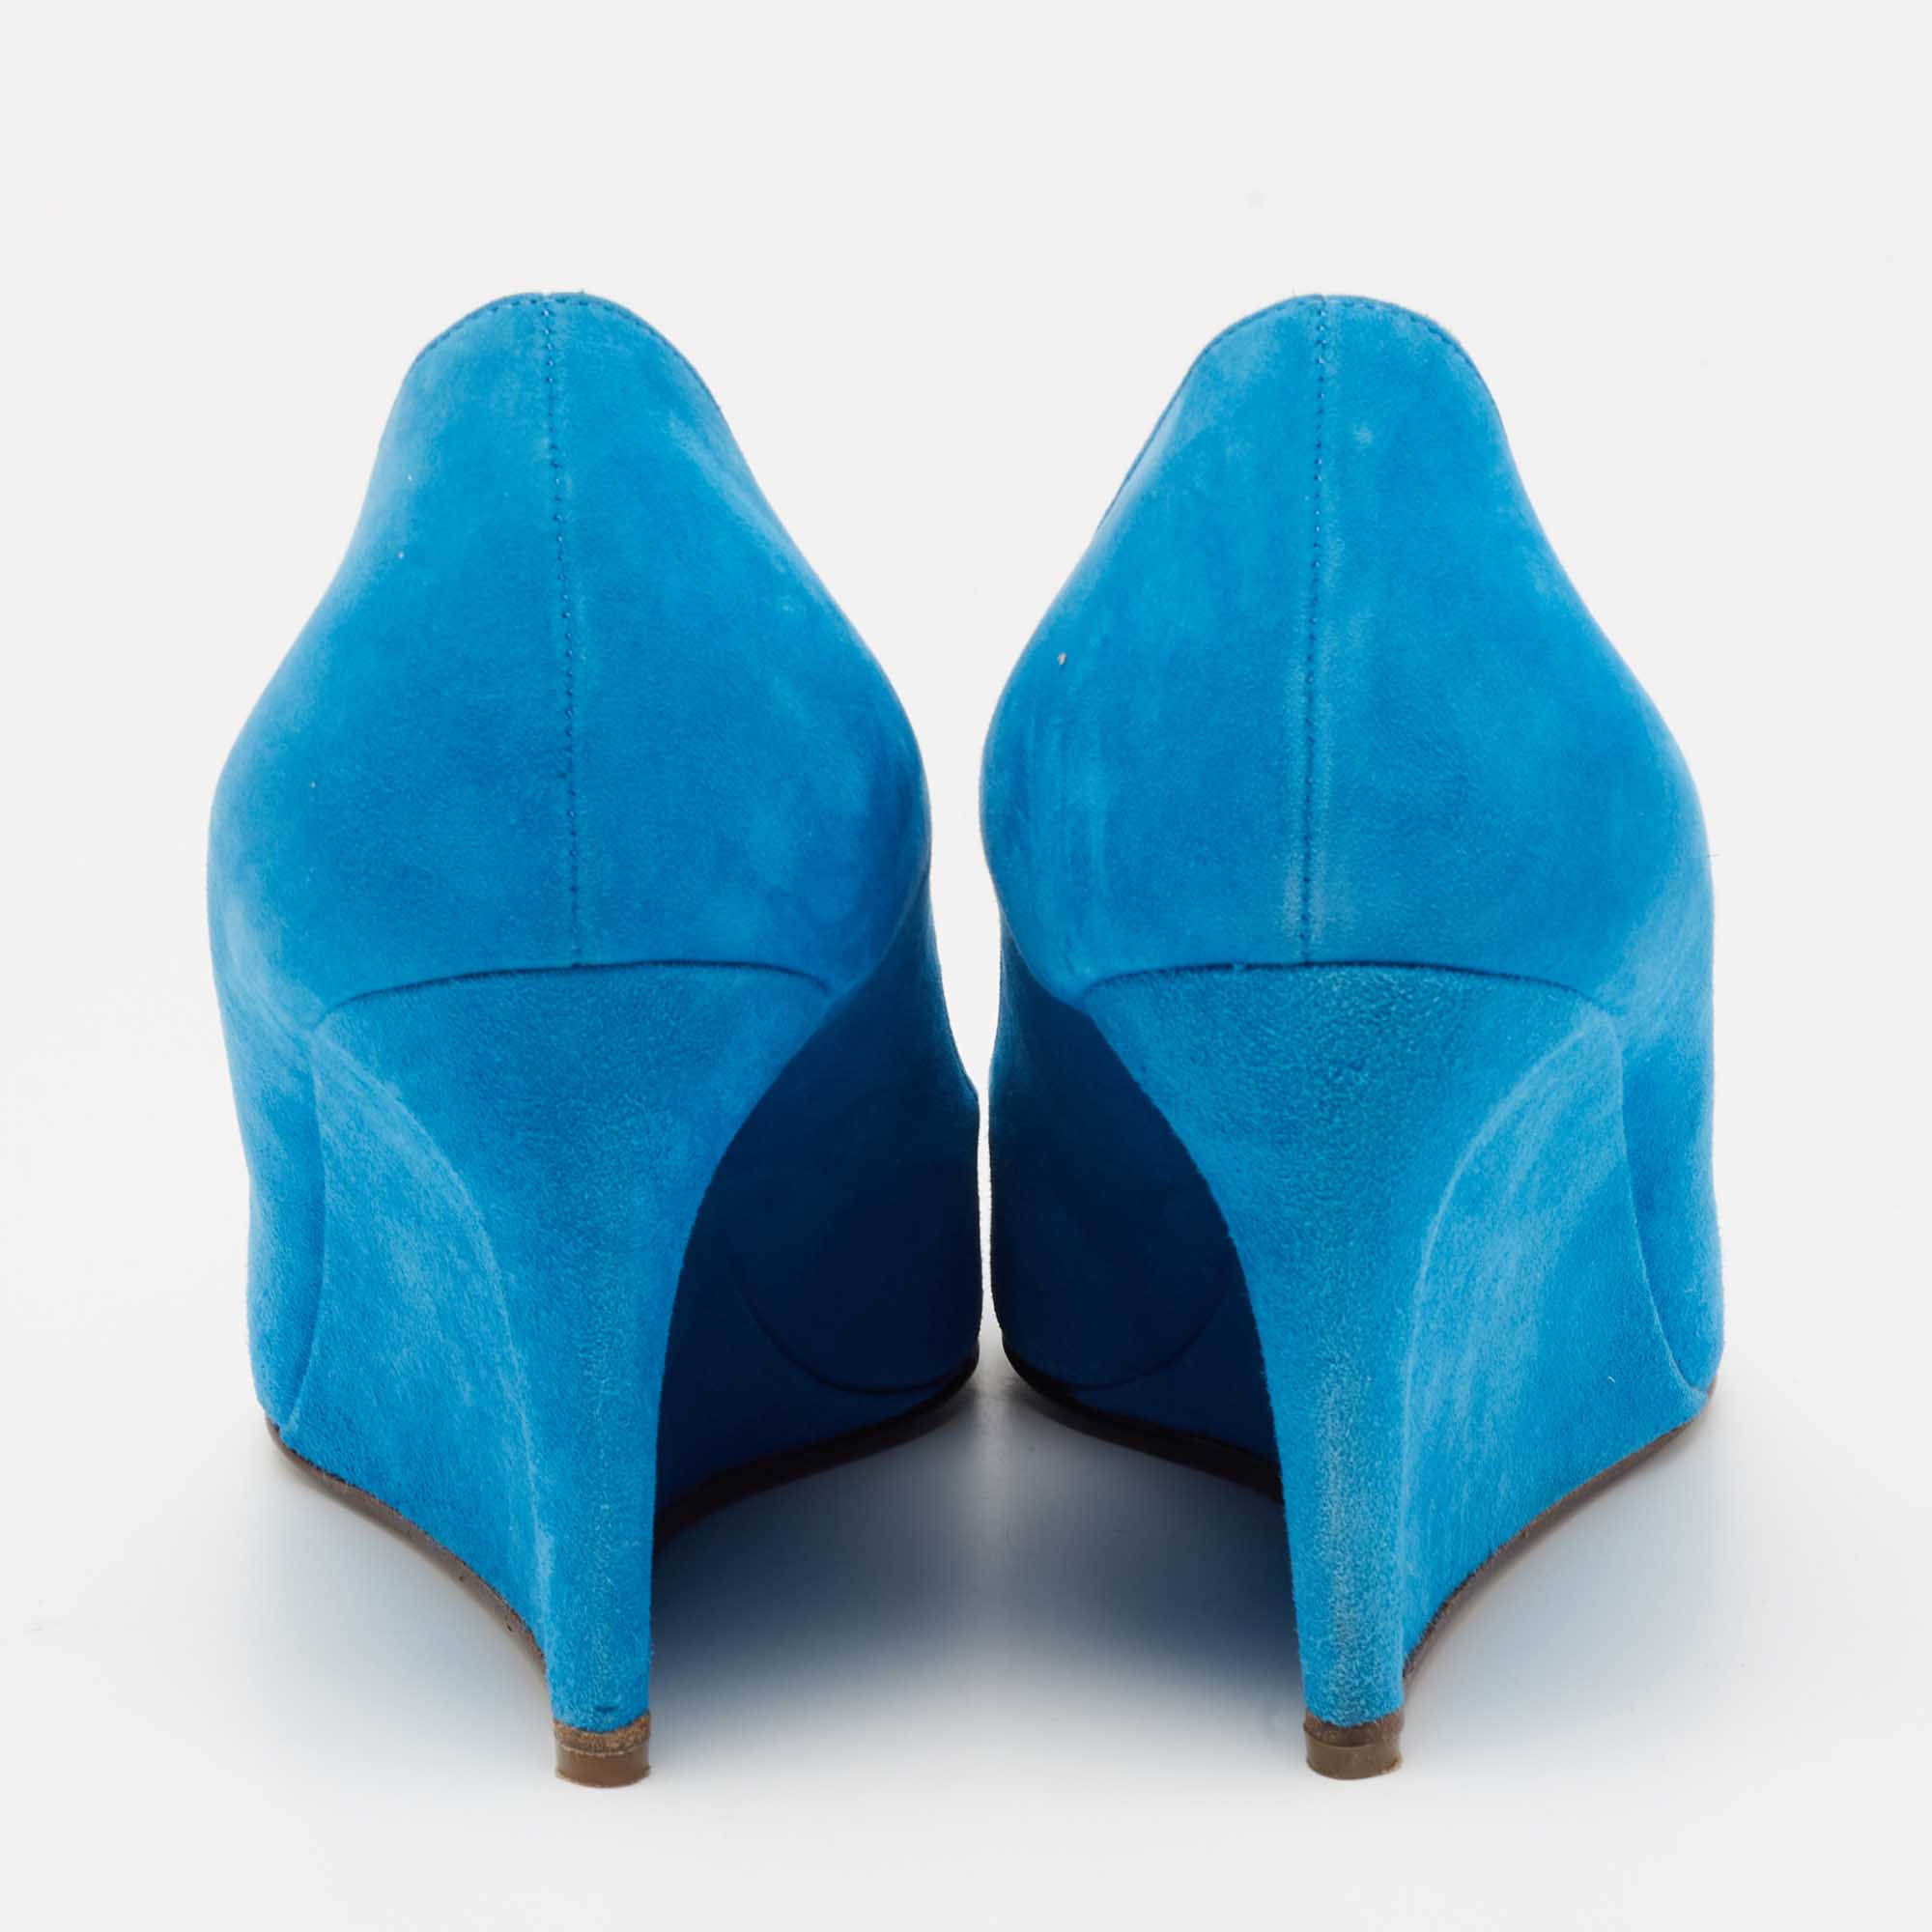 Sergio Rossi Blue Suede Peep Toe Wedge Pumps Size 40.5